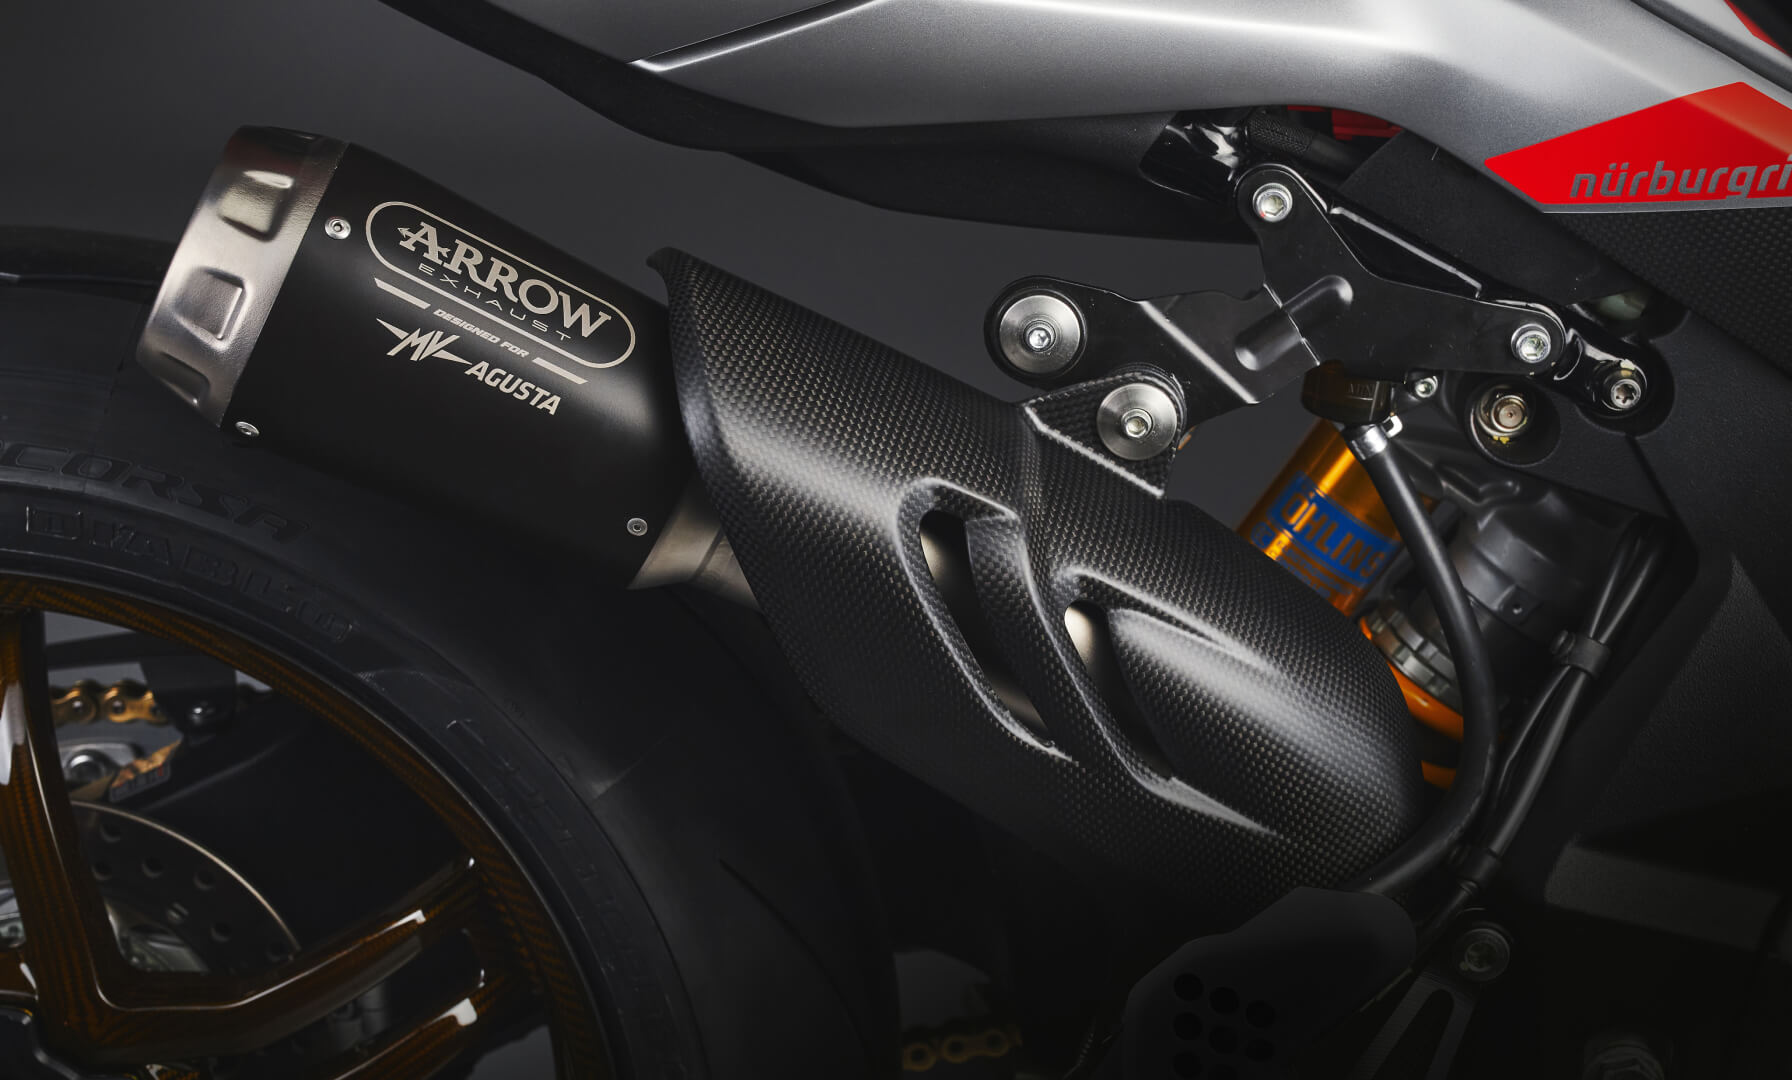 A picture of the arrow exhaust on the MV Agusta Brutale 1000 Nürburgring